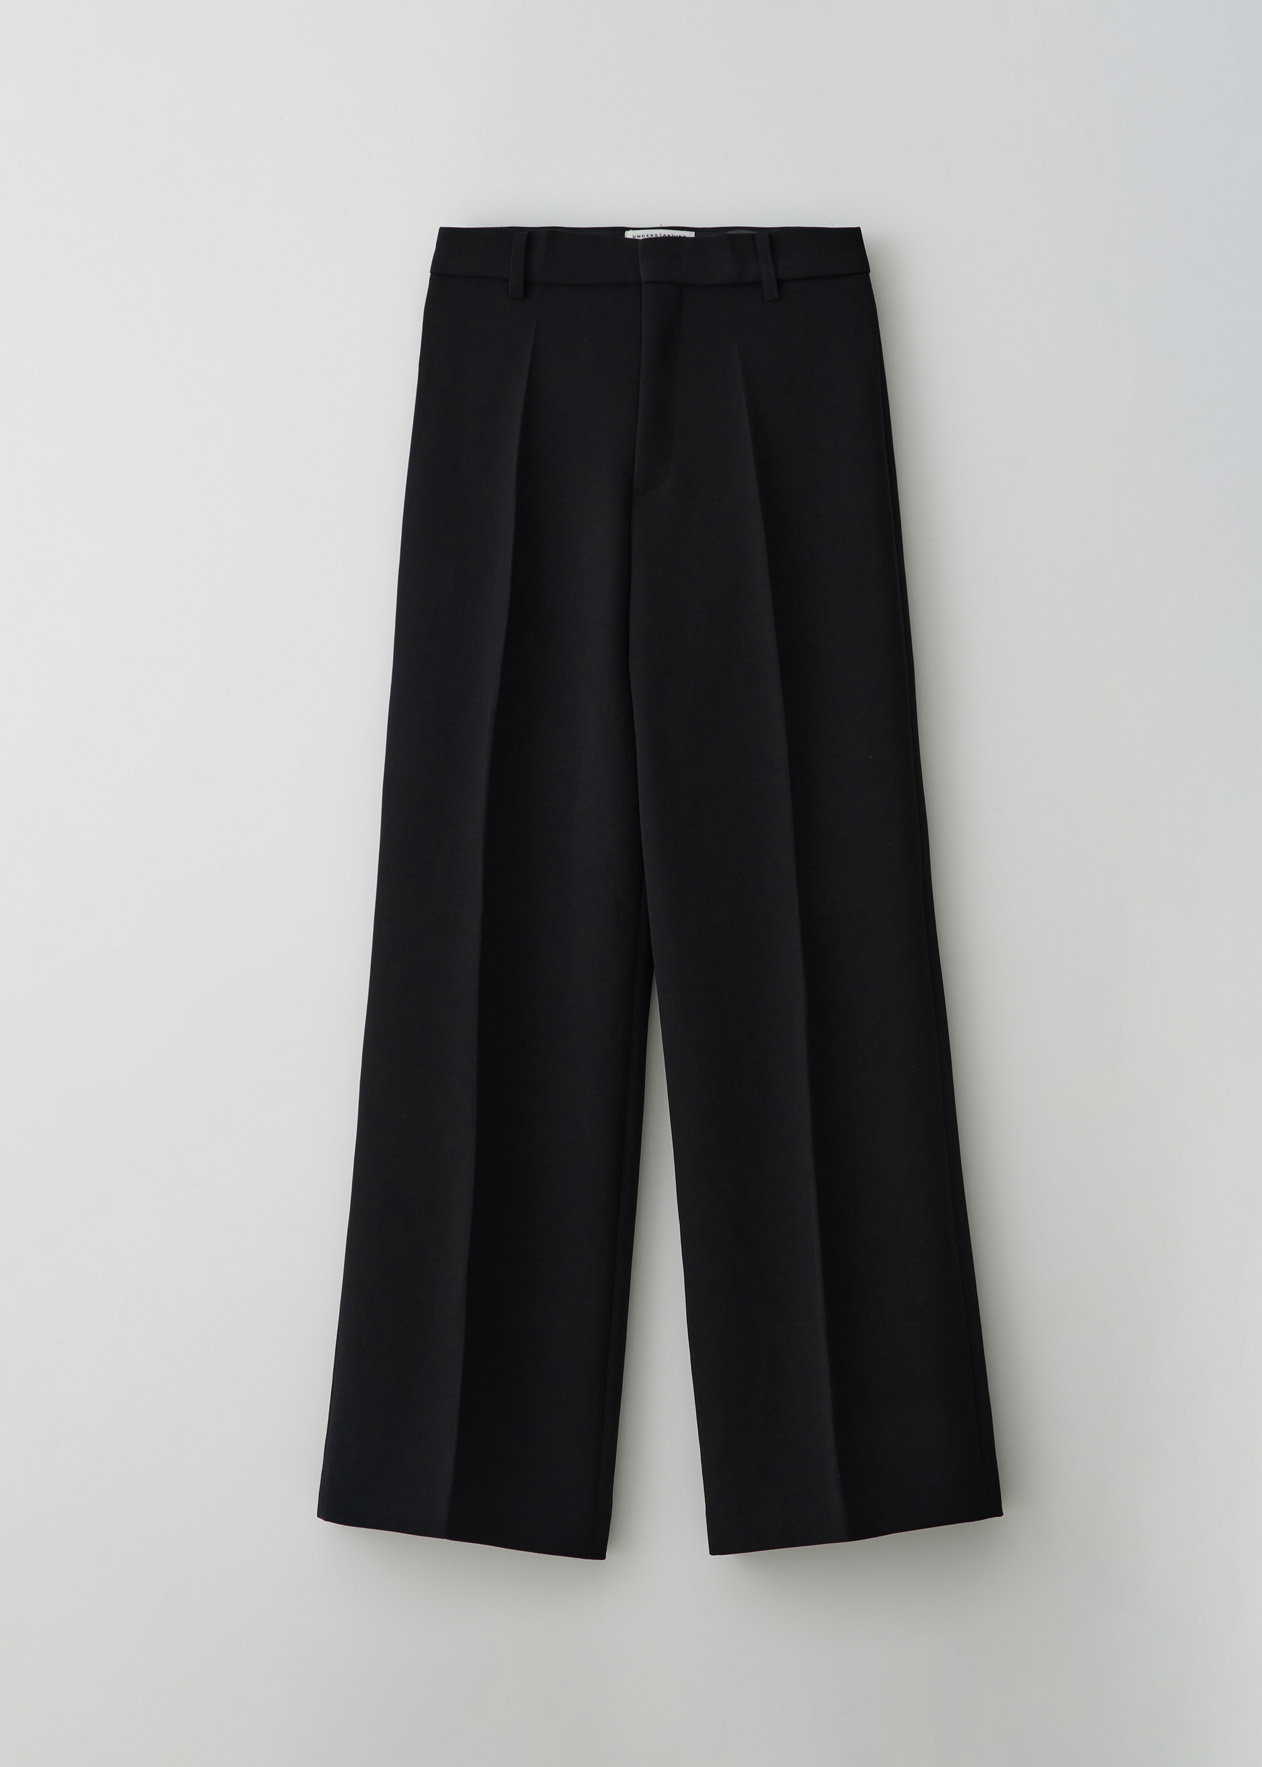 Spring theory pants